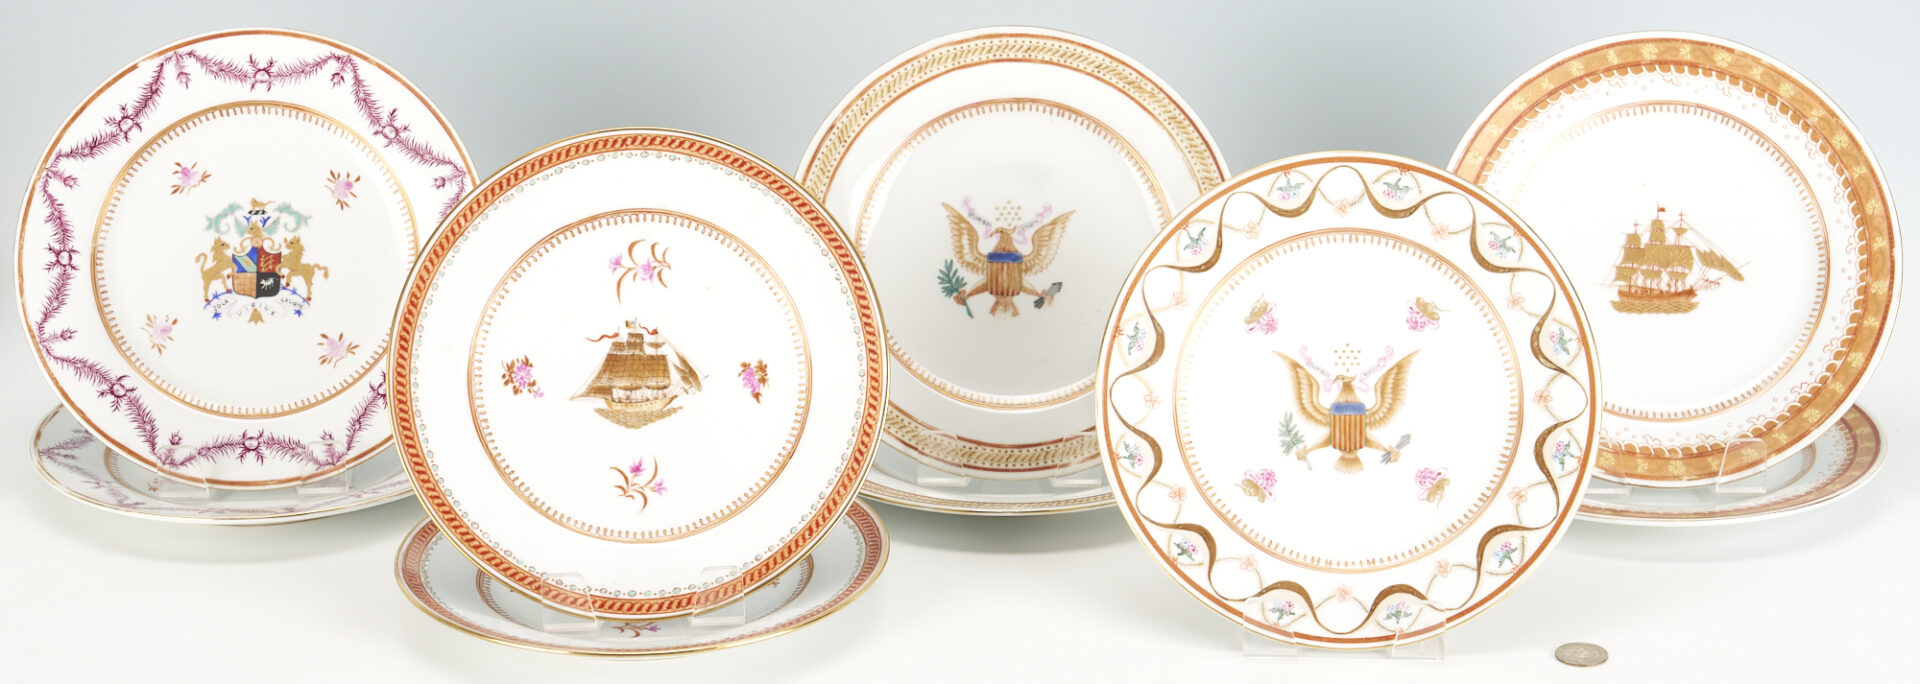 Lot 10: 9 Chinese Export Armorial Porcelain Plates